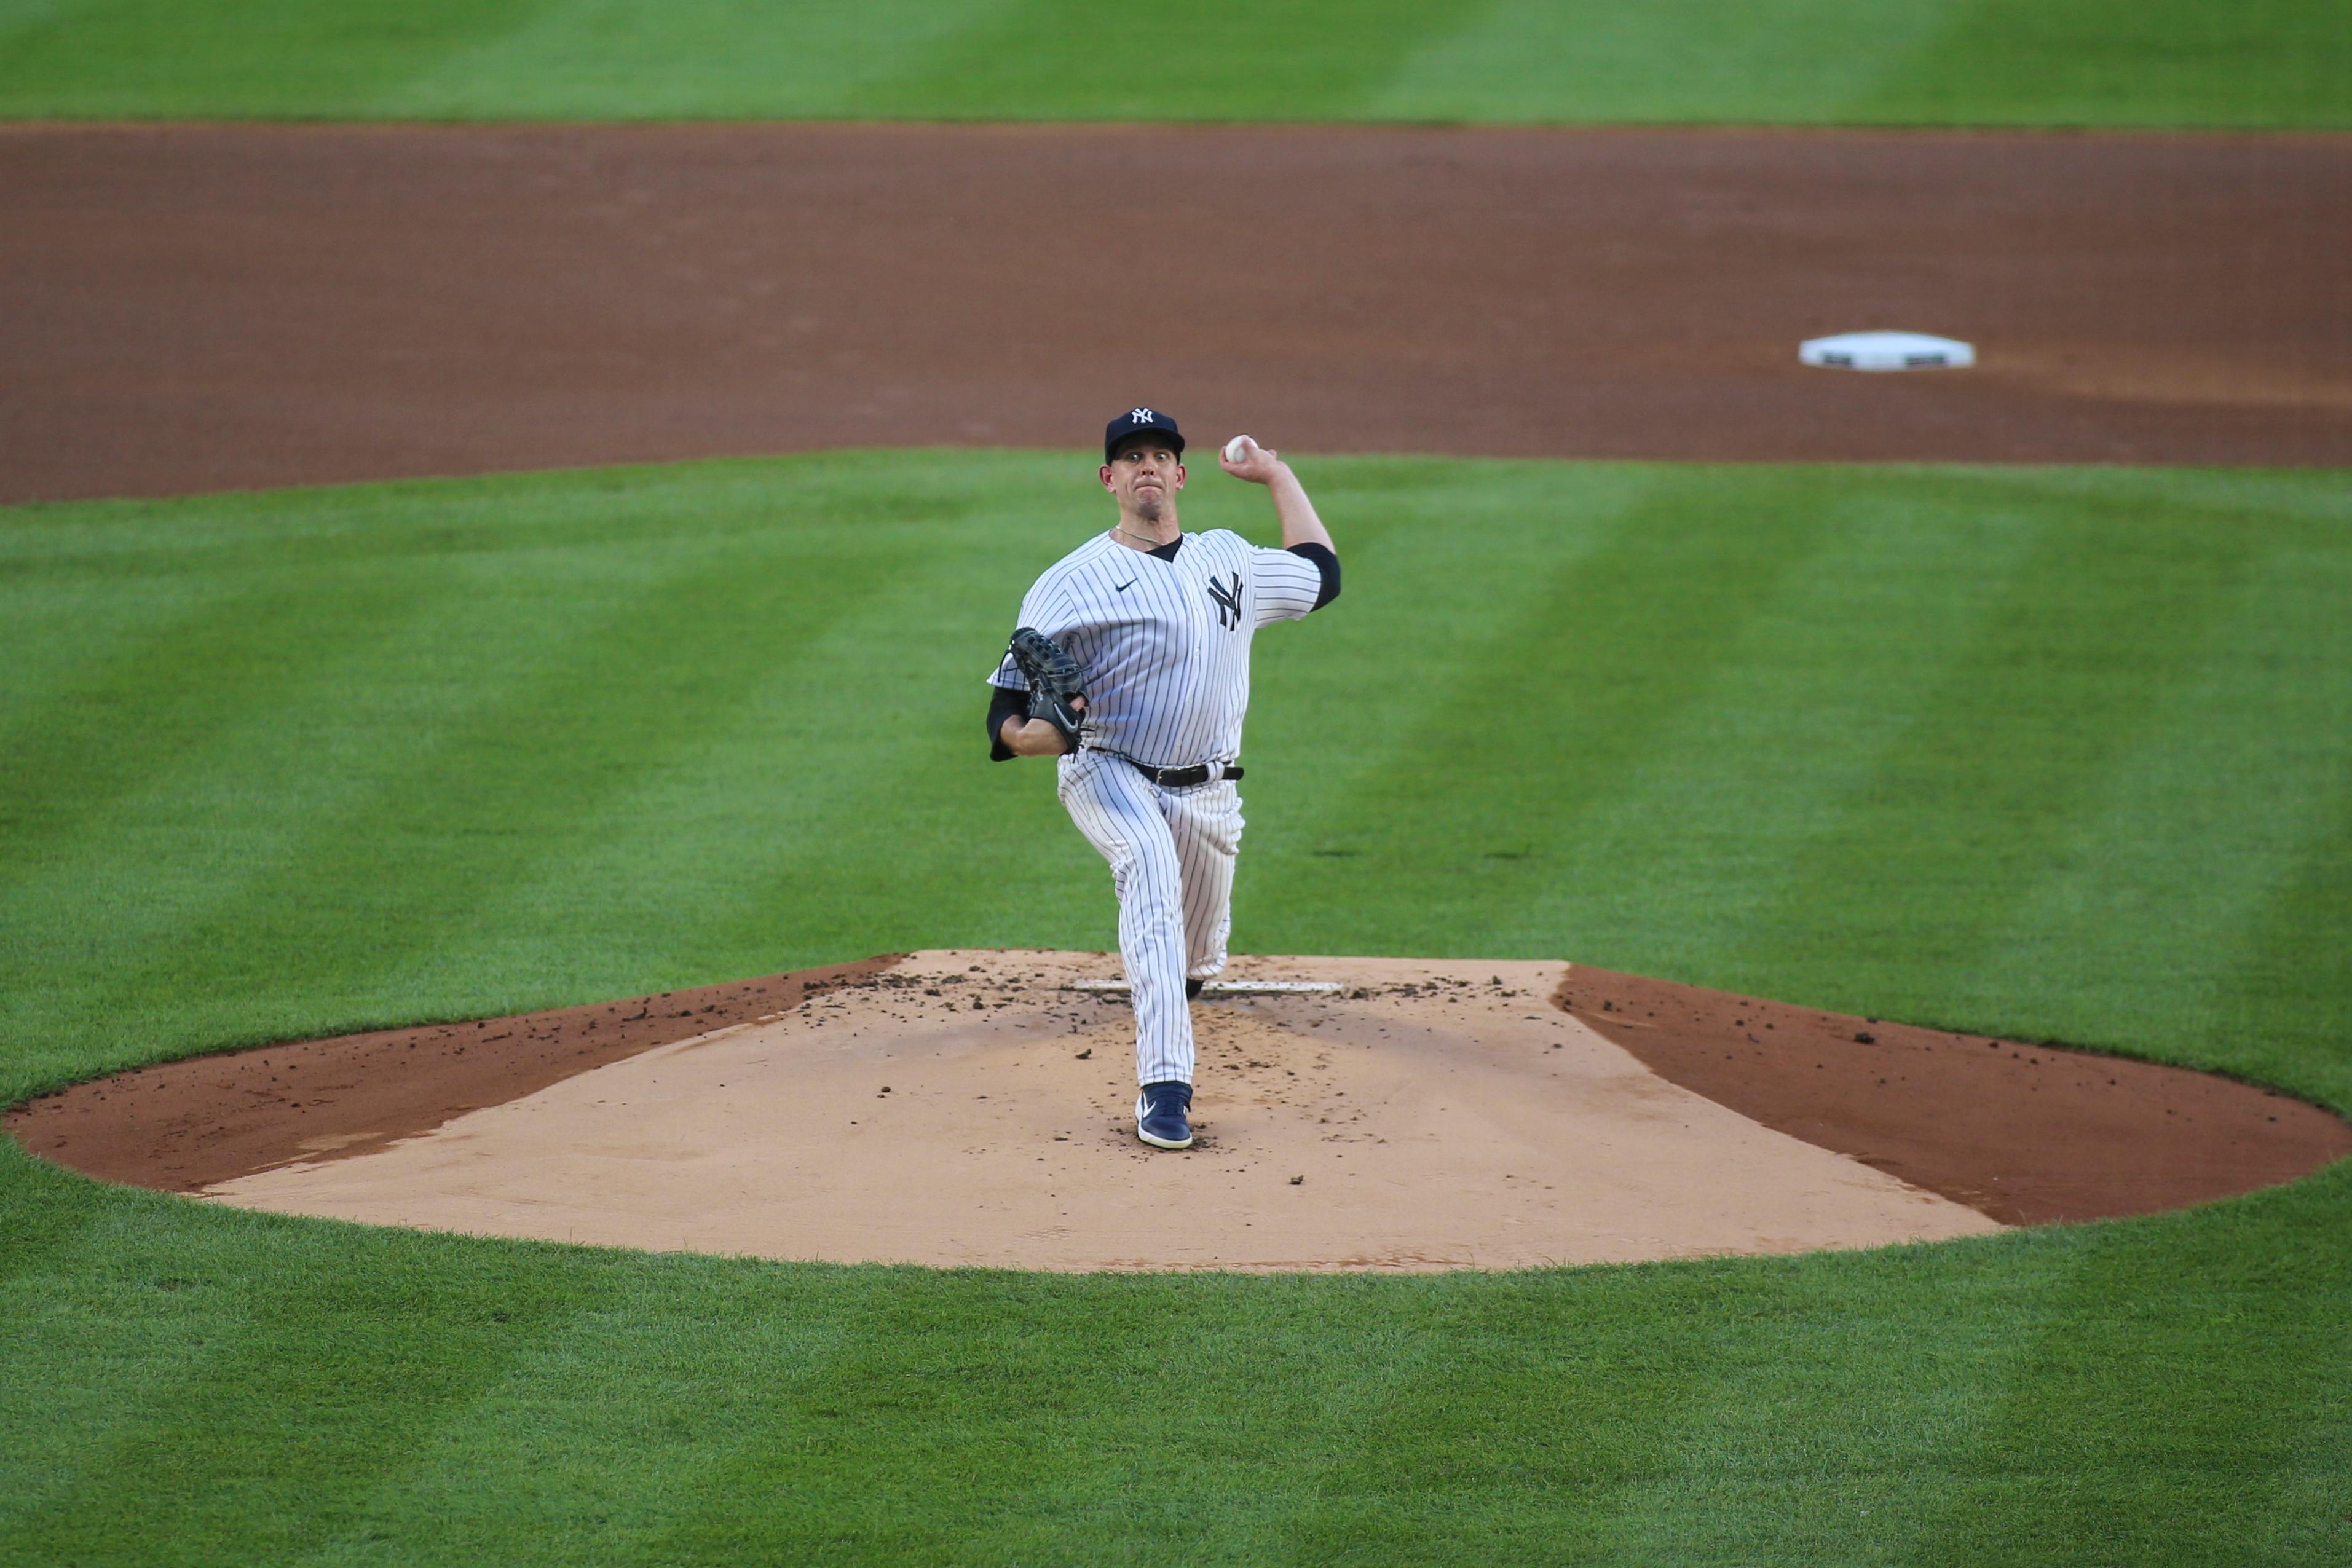 Aug 2, 2020; Bronx, New York, USA; New York Yankees pitcher James Paxton (65) pitches in the first inning against the Boston Red Sox at Yankee Stadium. Mandatory Credit: Wendell Cruz-USA TODAY Sports / © Wendell Cruz-USA TODAY Sports